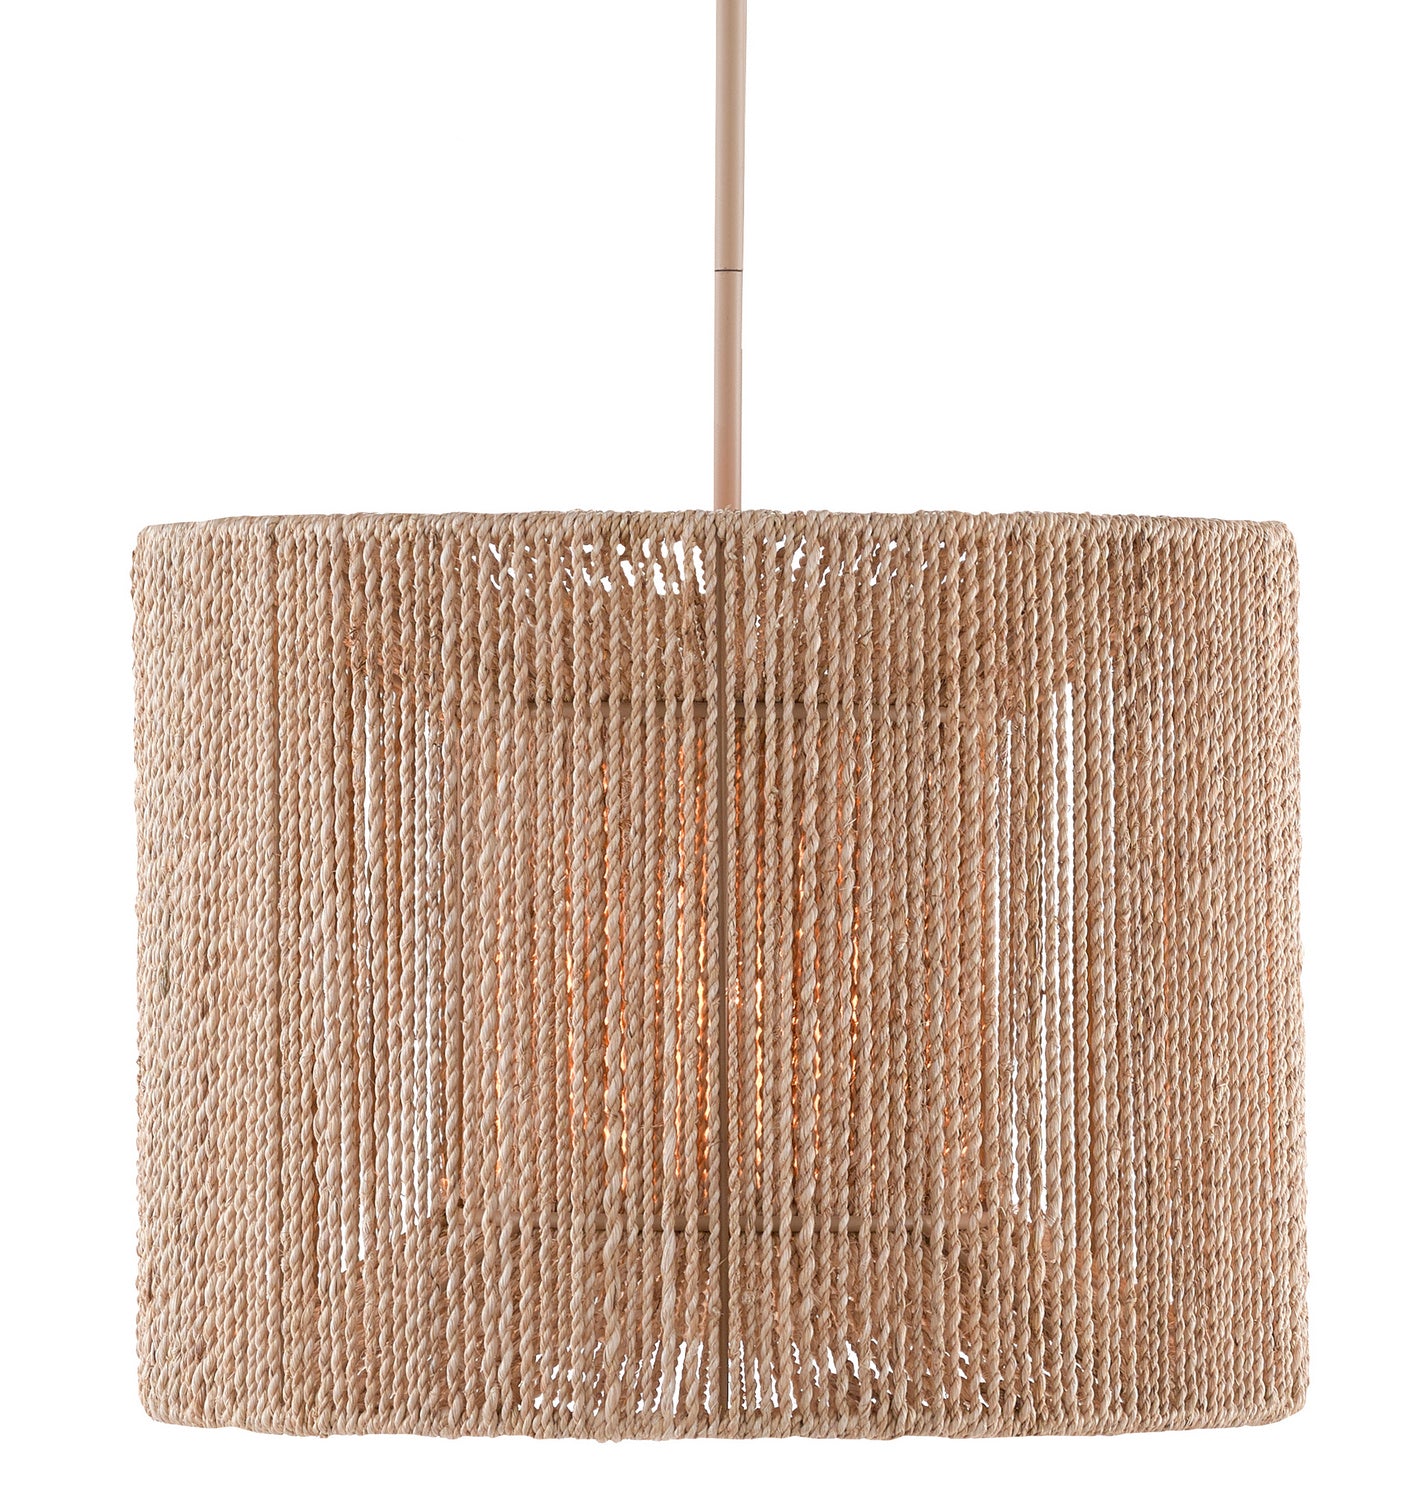 Five Light Chandelier from the Mereworth collection in Natural Rope/Beige finish